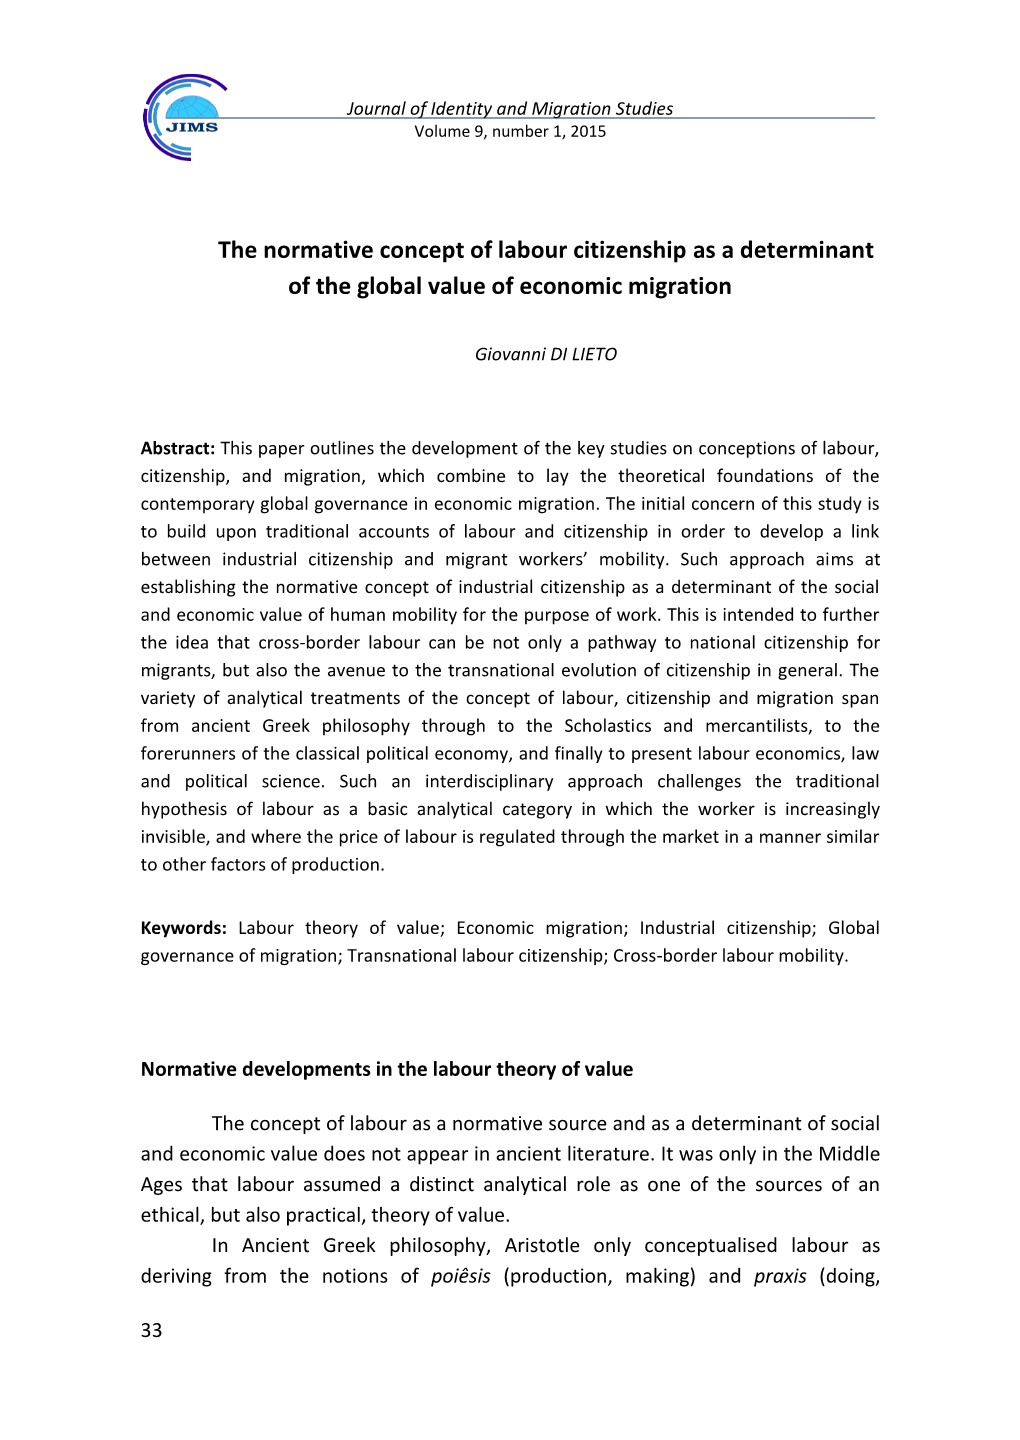 The Normative Concept of Labour Citizenship As a Determinant of the Global Value of Economic Migration